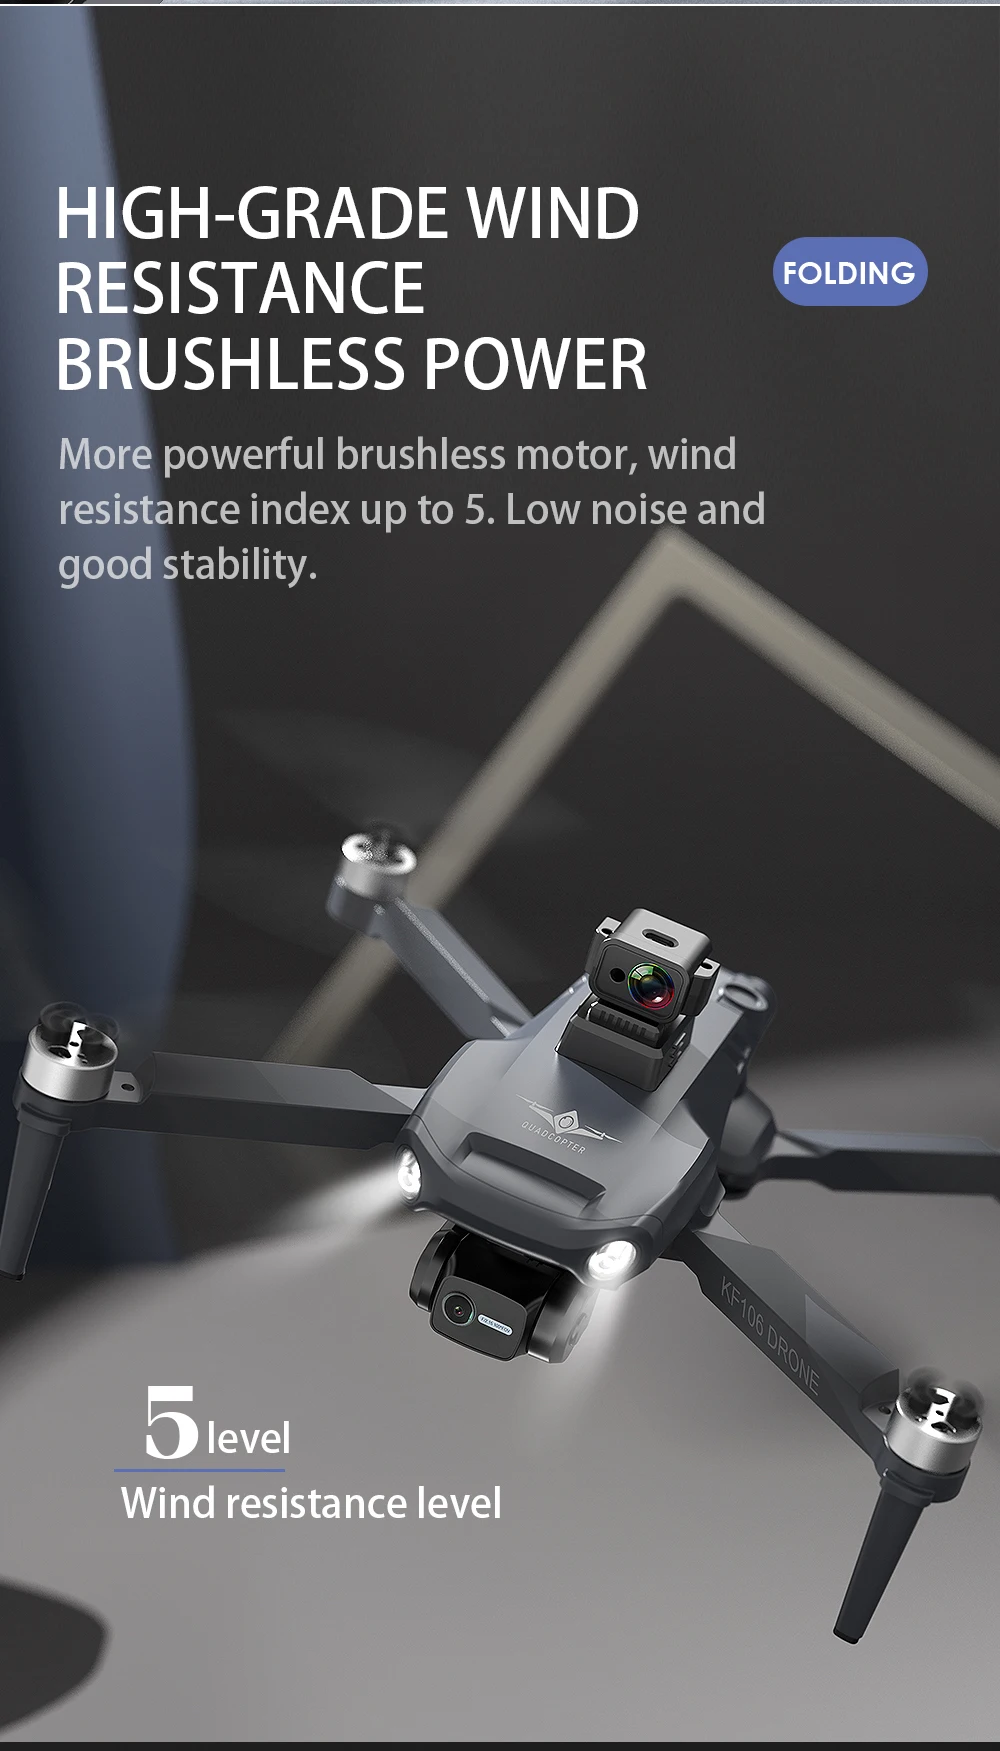 KFPLAN KF106 Drone, wind resistance index up to 5 . low noise and good stability.